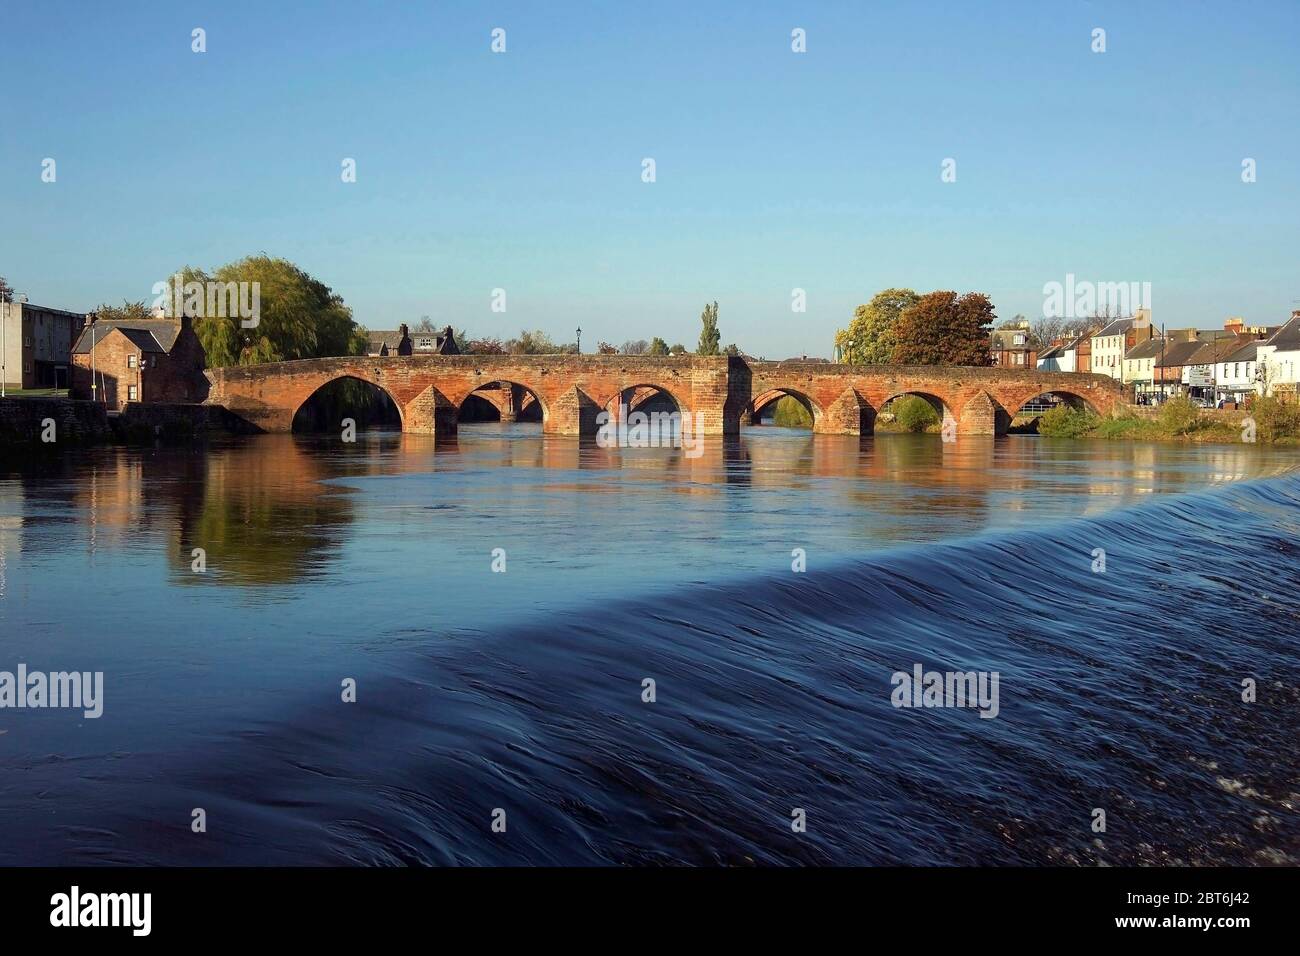 The Caul and the Auld Brig - River Nith - Dumfries Stock Photo